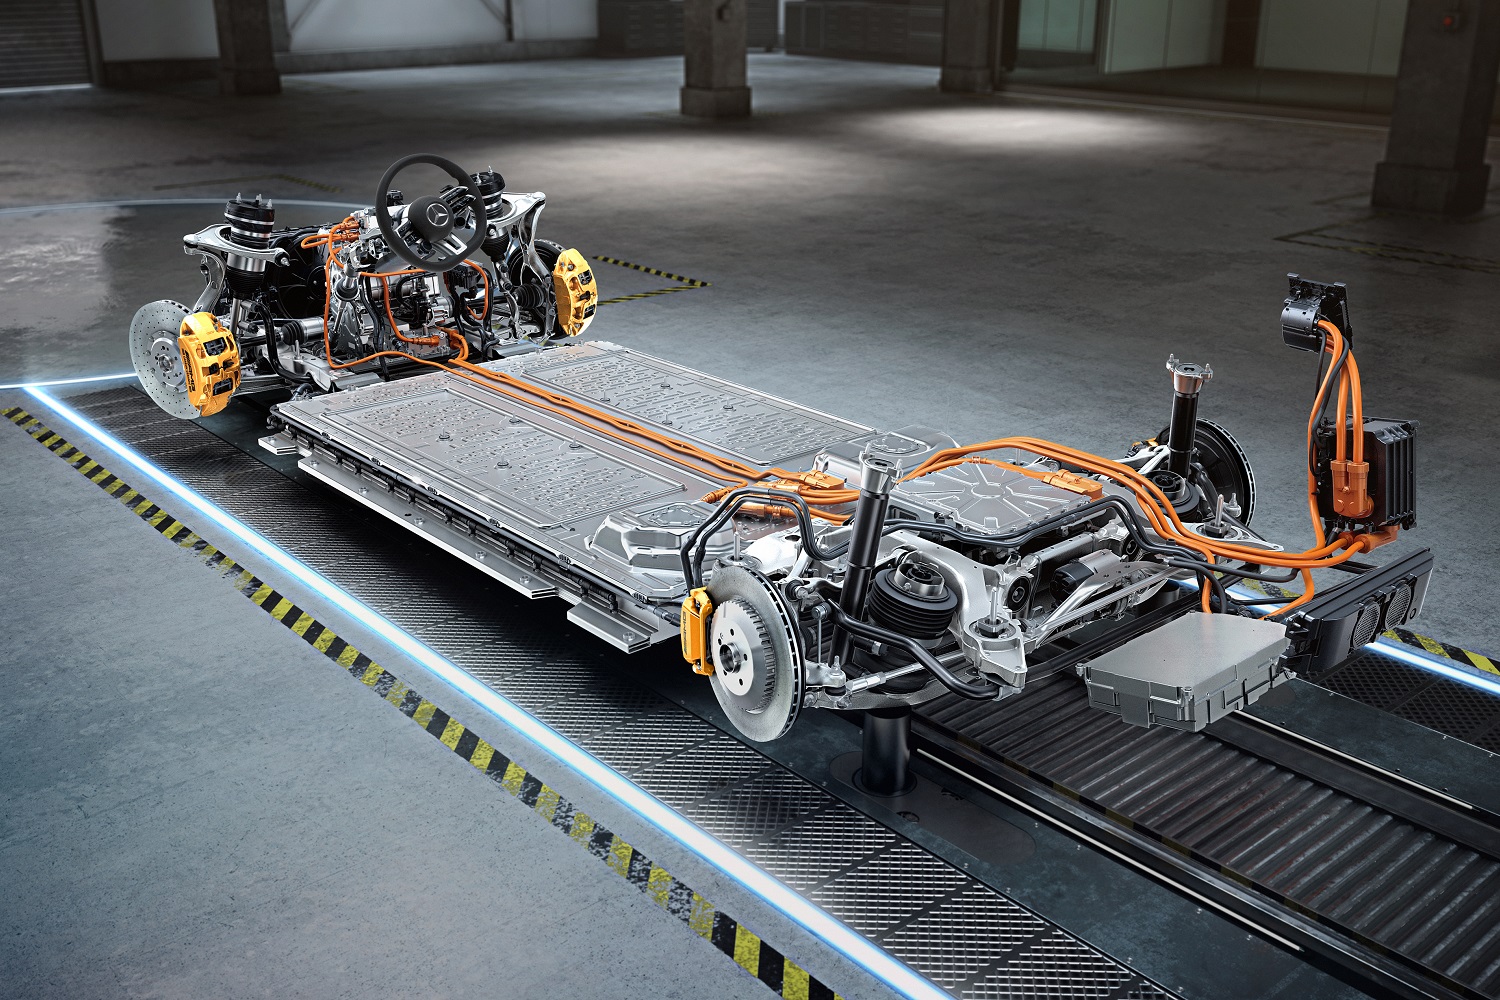 Mercedes-AMG's hybrid and electric drivetrains